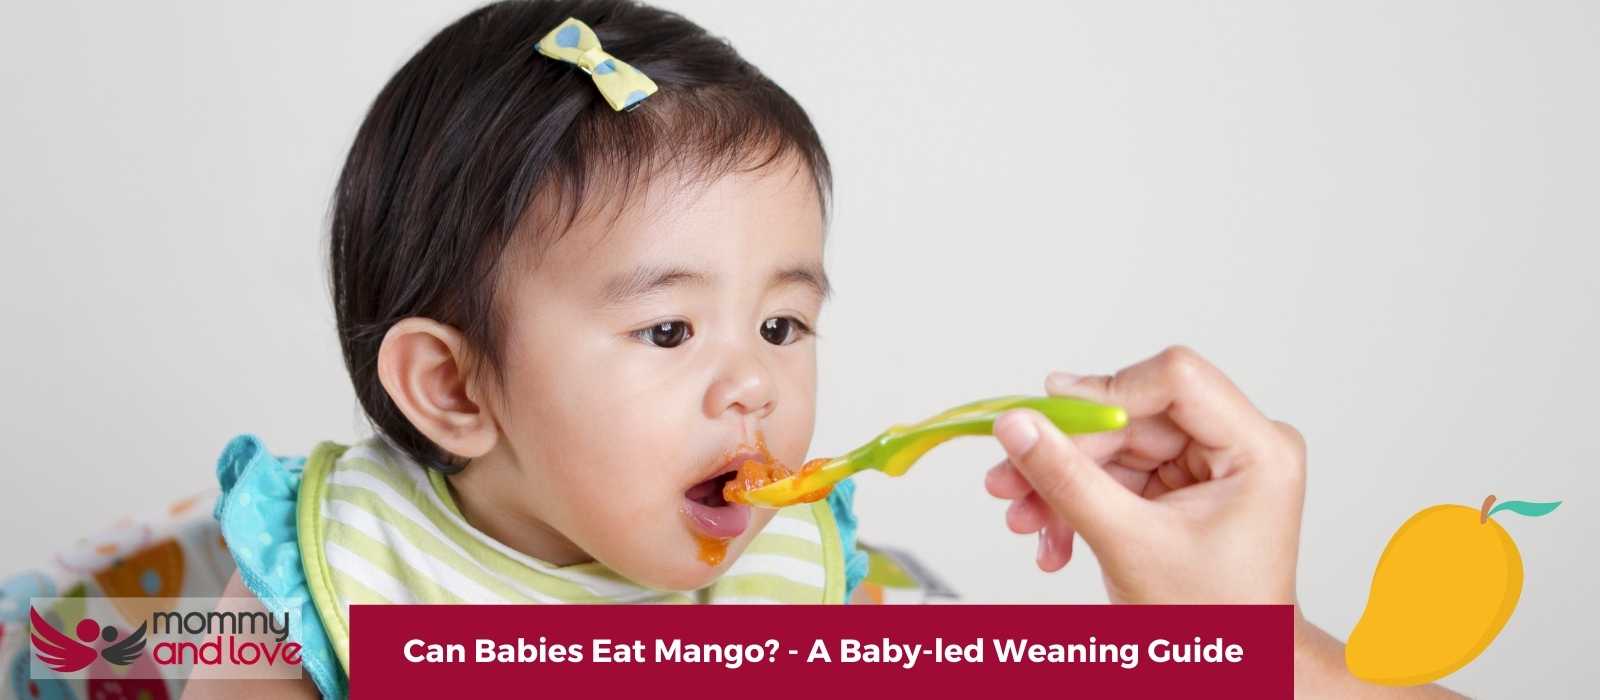 Can Babies Eat Mango - A Baby-led Weaning Guide